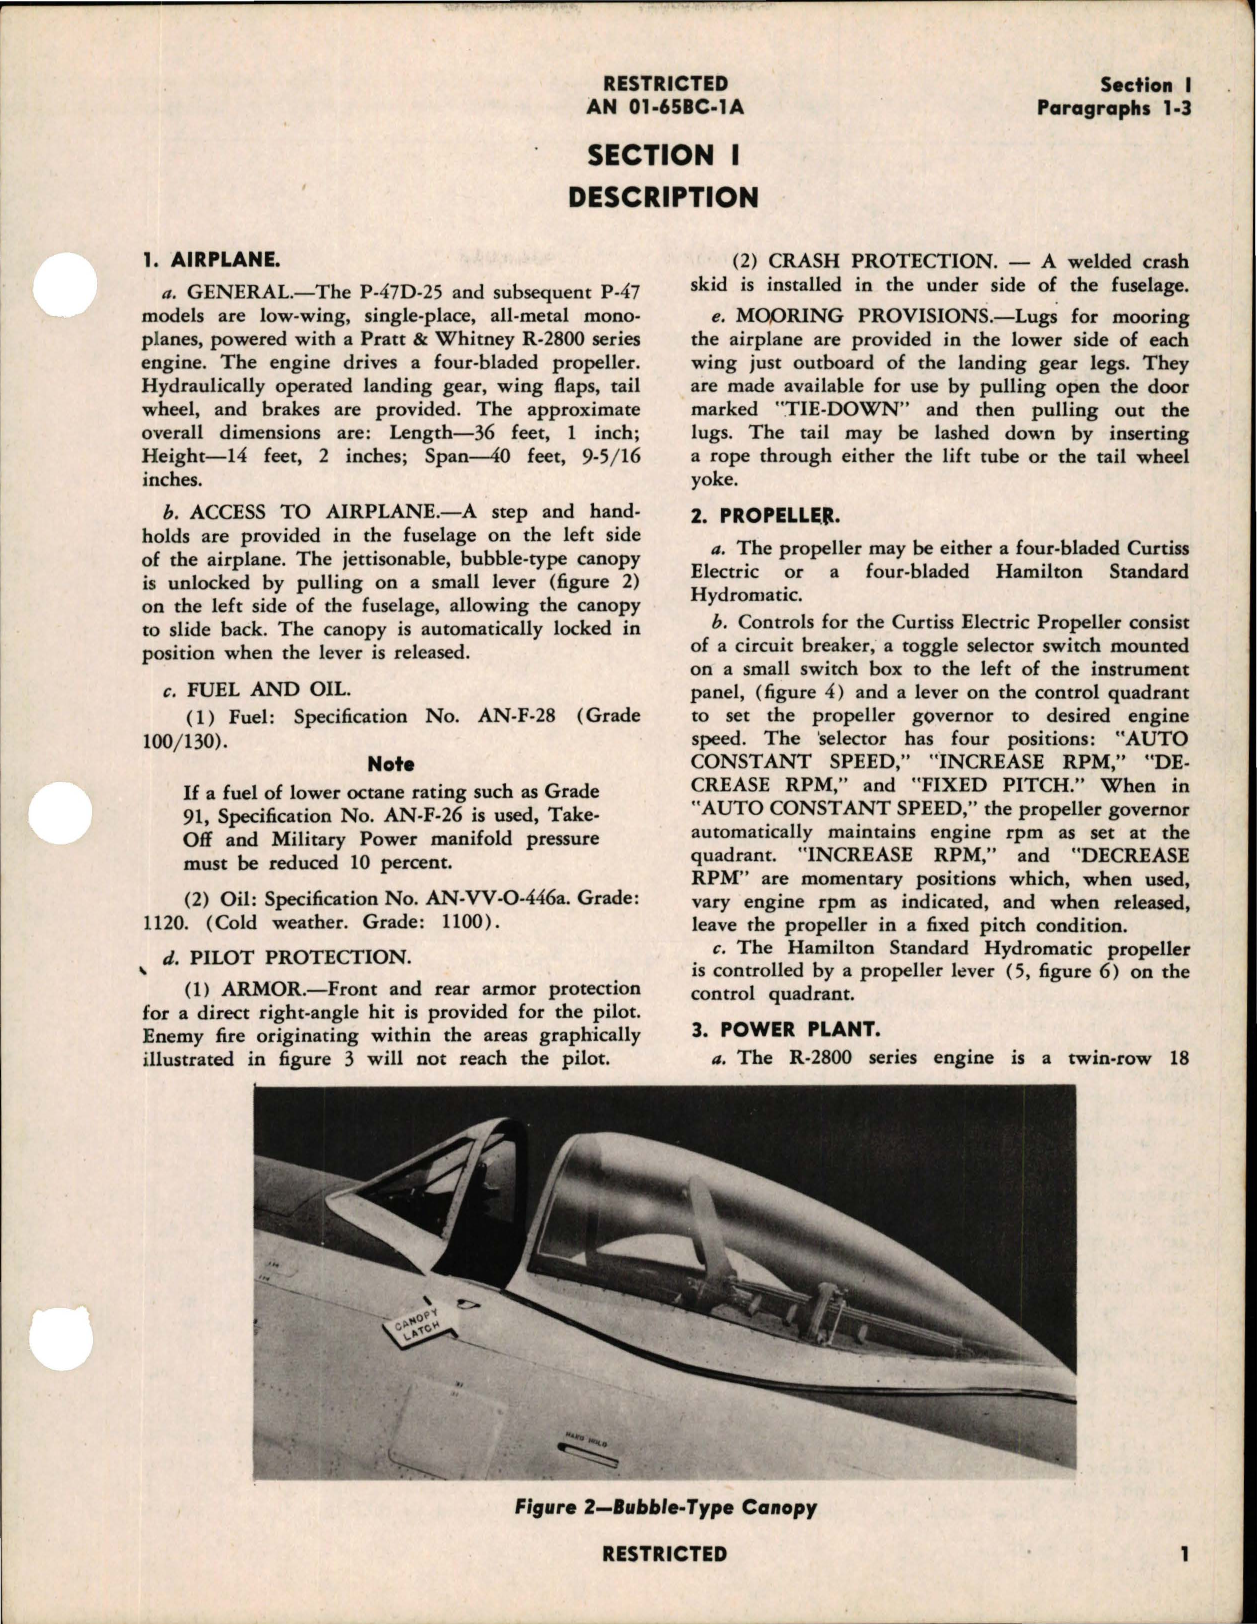 Sample page 5 from AirCorps Library document: Pilot's Flight Operating Instructions for P-47D-25, P-47D-26, P-47D-27, P-47D-28, P-47D-30 and P-47D-35